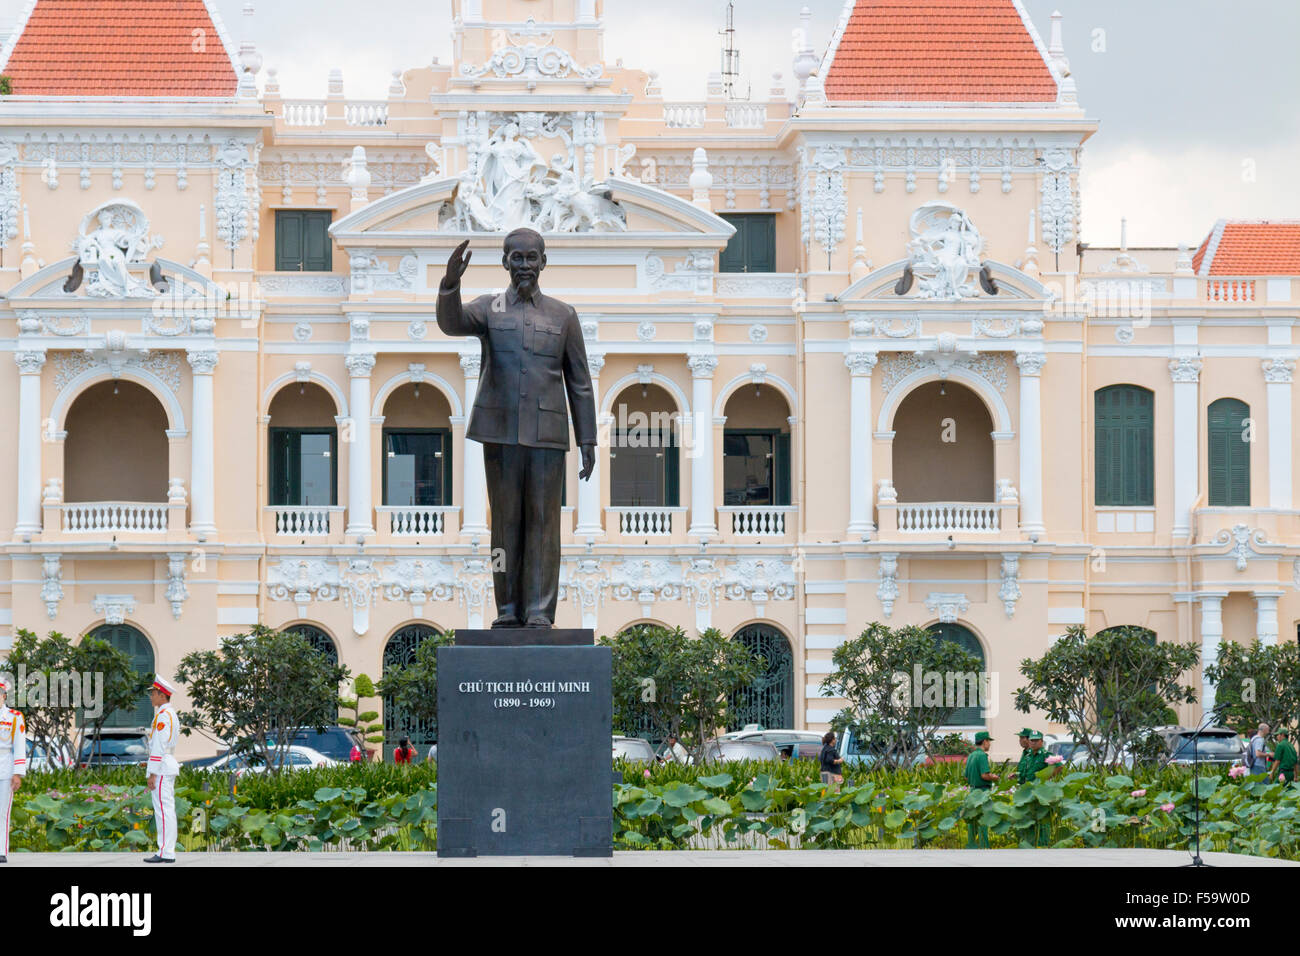 Ho Chi Minh city hall or Hotel de Ville de saigon or People's committee building in Ho chi Minh with statue of namesake,Vietnam Stock Photo